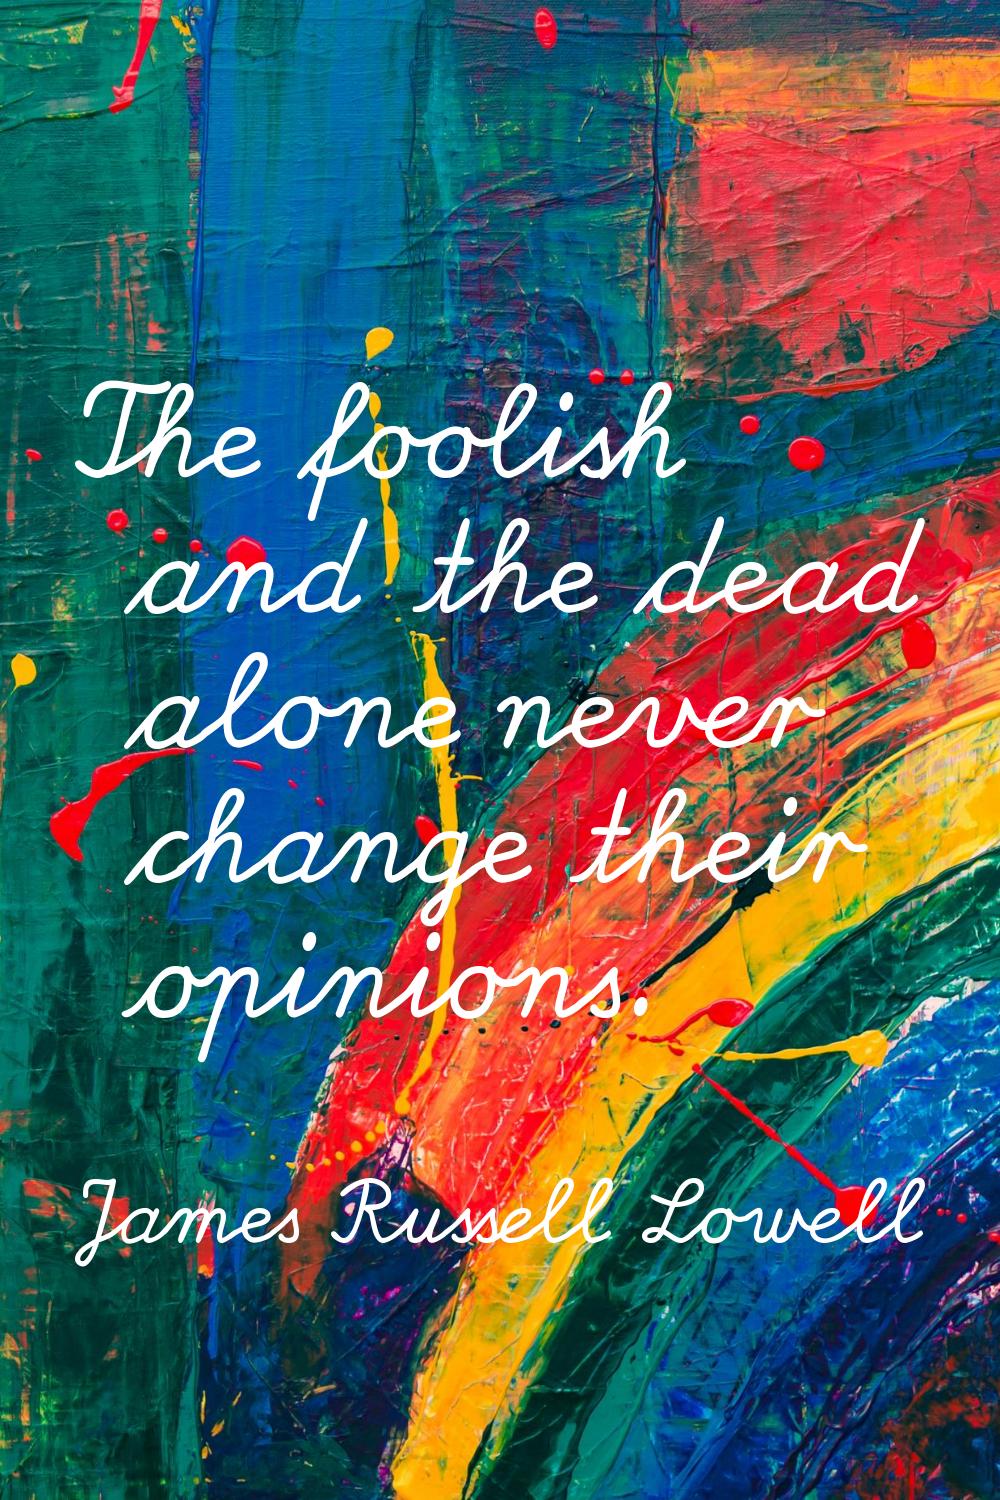 The foolish and the dead alone never change their opinions.